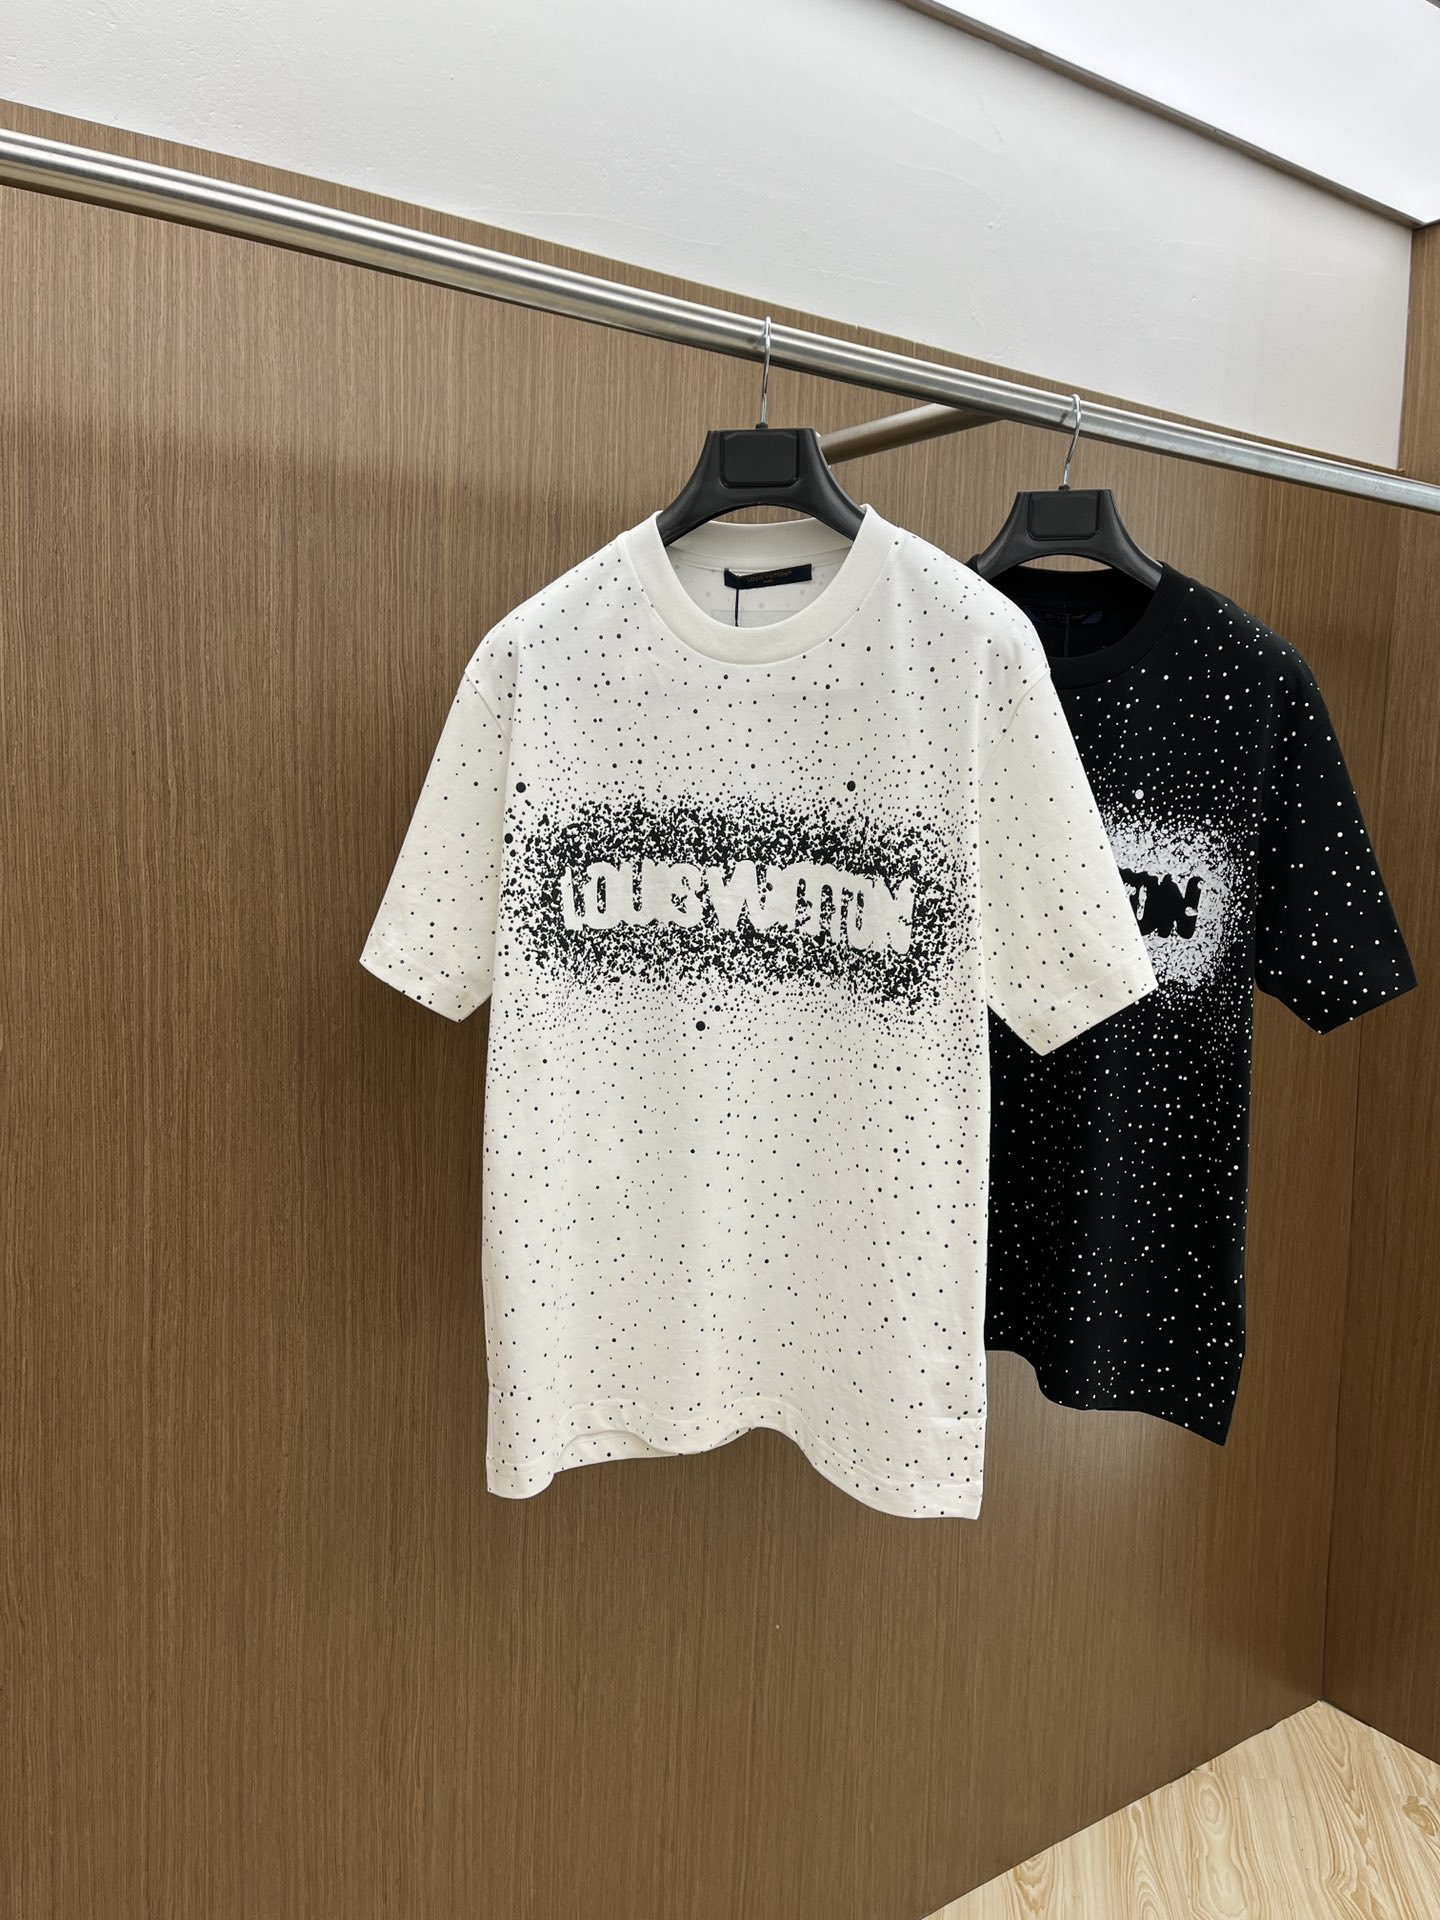 Louis Vuitton Clothing T-Shirt High Quality Replica
 Cotton Spring Collection Fashion Short Sleeve